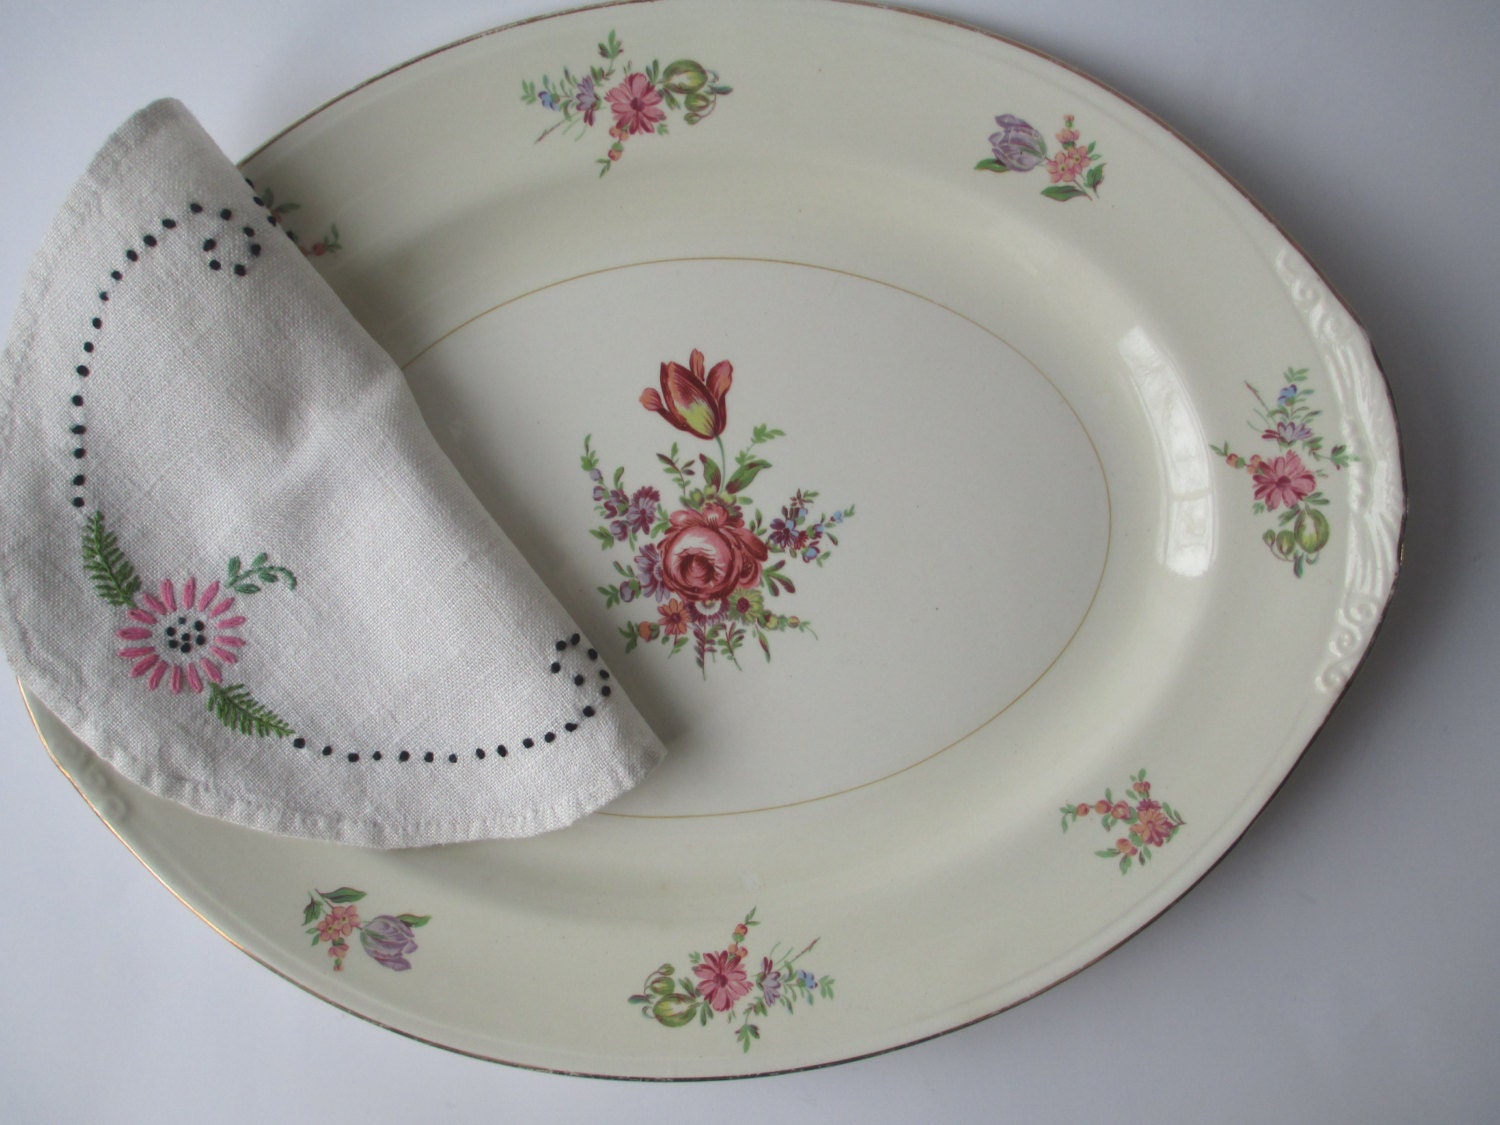 Vintage Homer Laughlin Pink Floral Serving Platter by thechinagirl